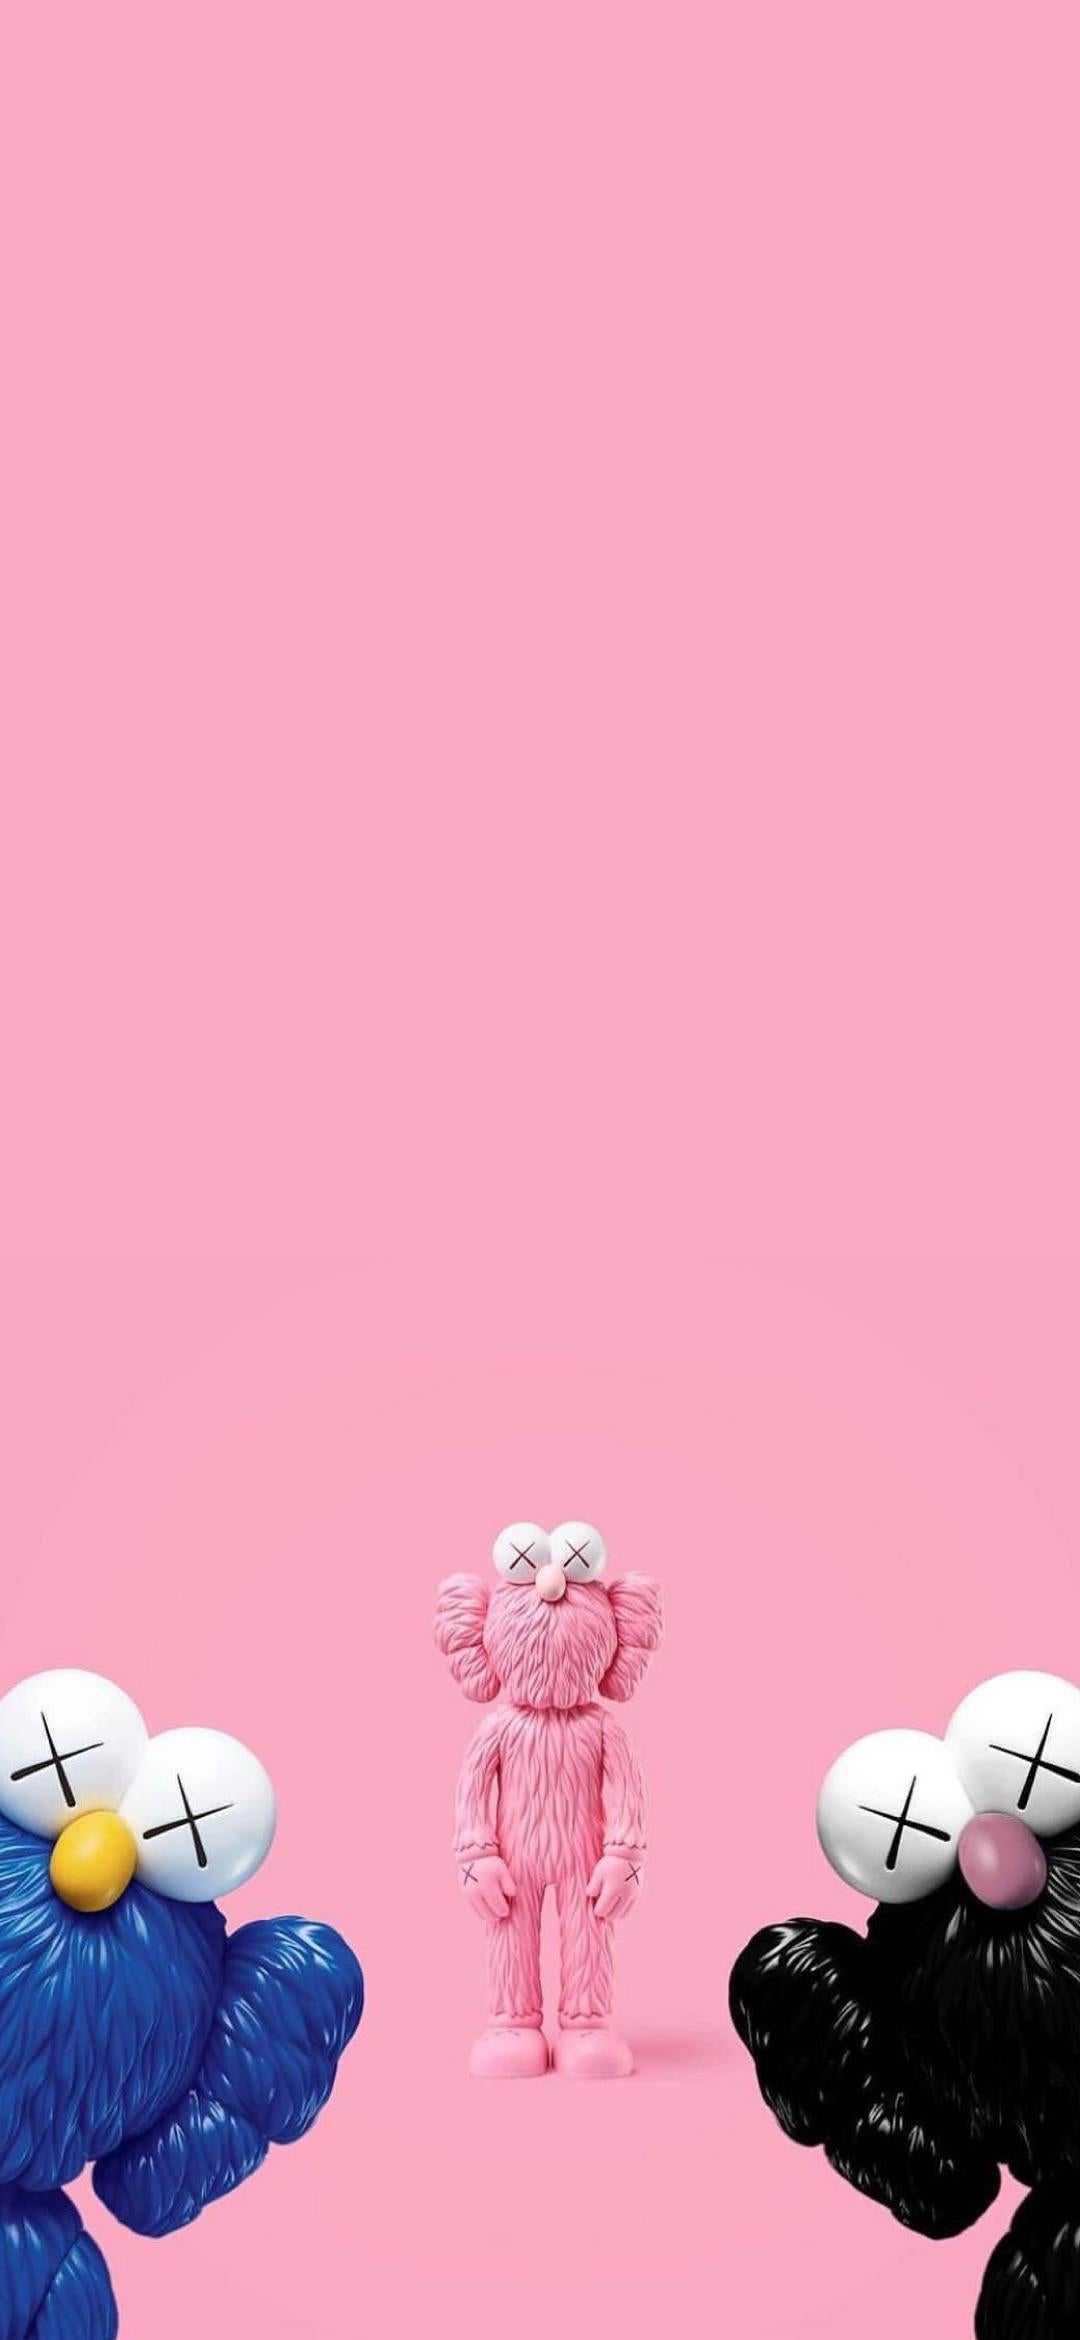 Kaws Background Discover more American, Brian Donnelly, Comic, Figurative Characters, Kaws wal. Kaws wallpaper, iPhone wallpaper girly, Hypebeast iphone wallpaper